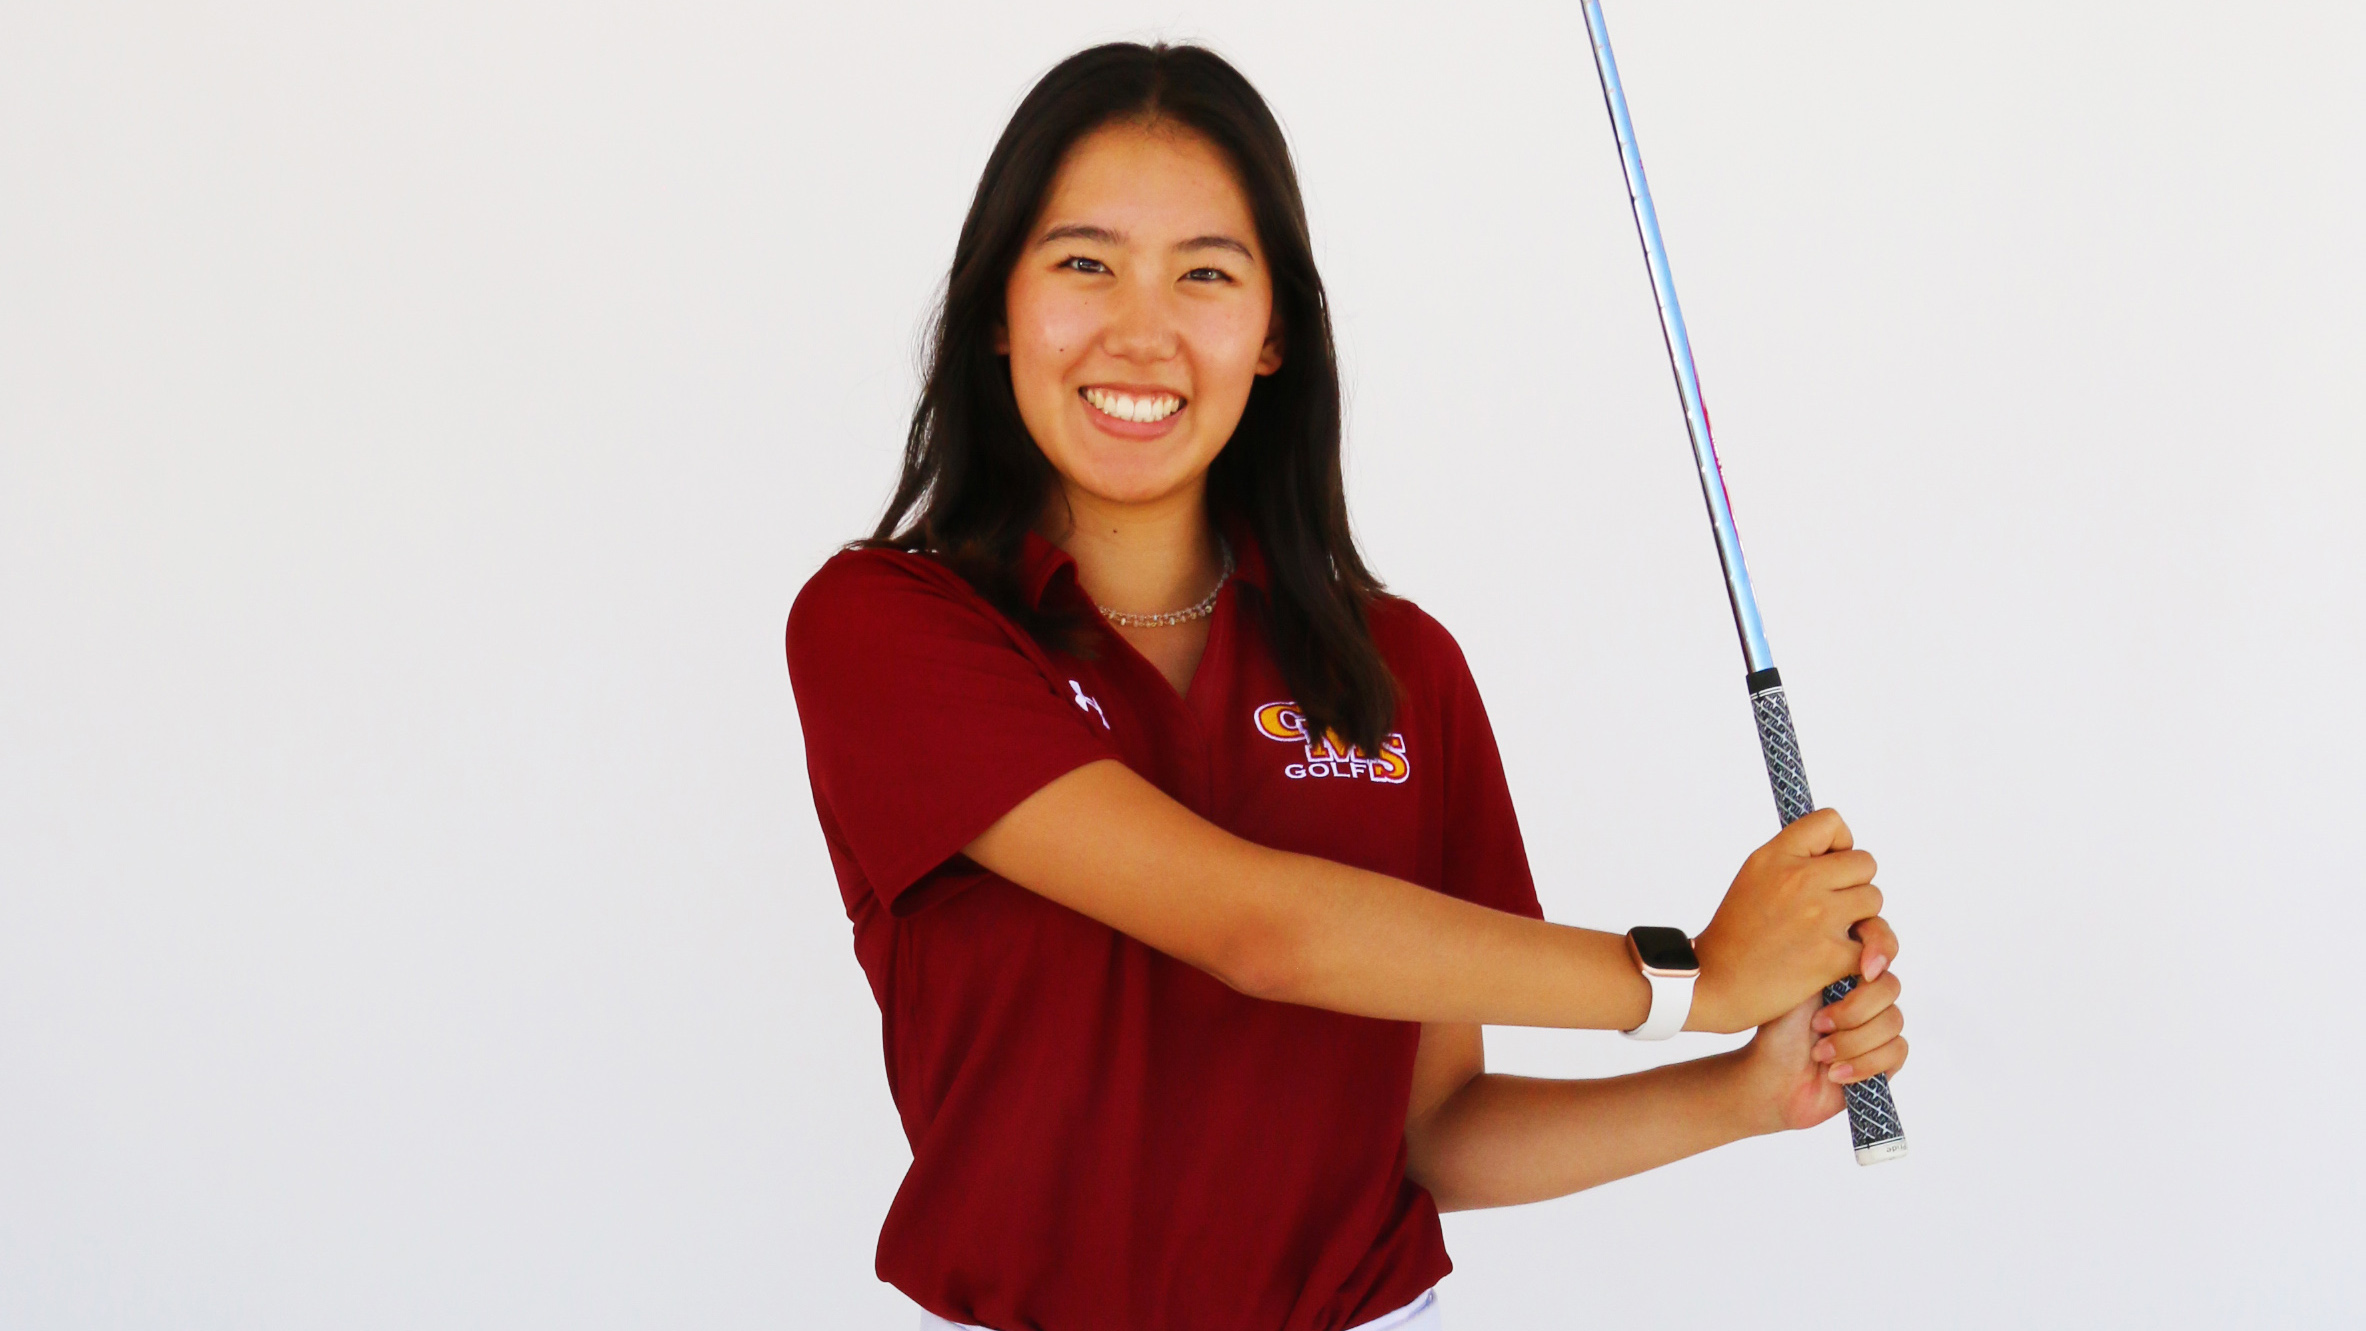 Irene Jun shot a 69 (-3) to lead the field after the first round